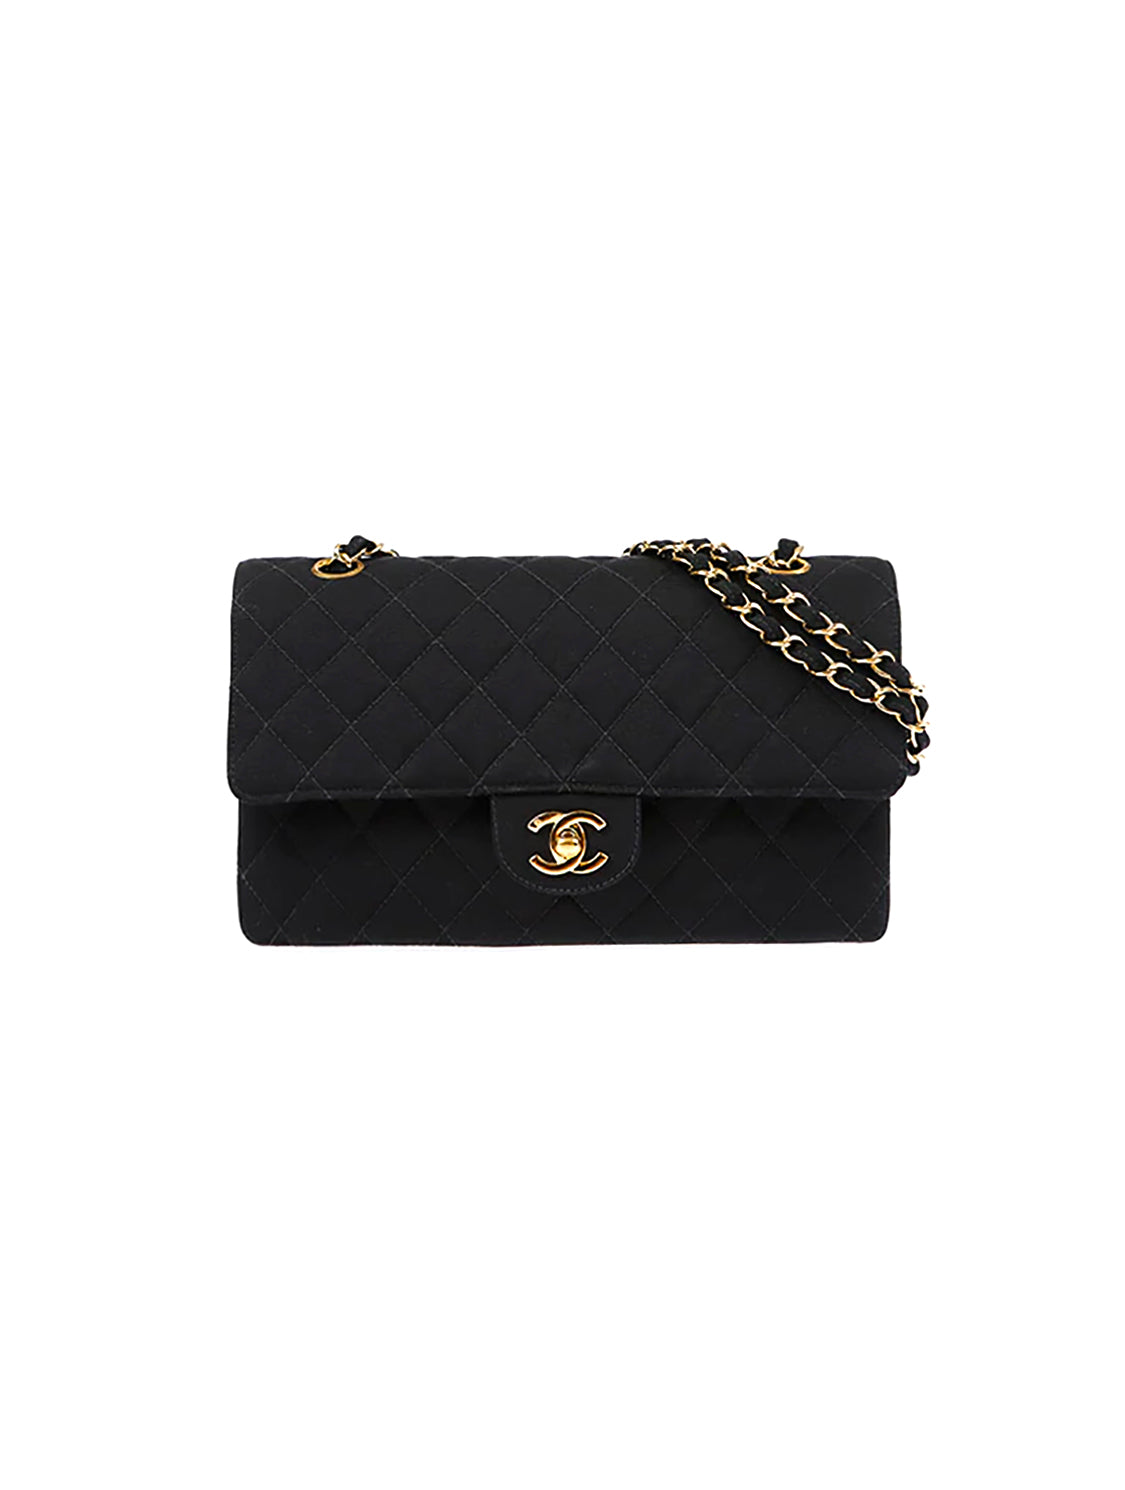 Chanel 2000s Extremely Rare Black CC Flap Bag · INTO